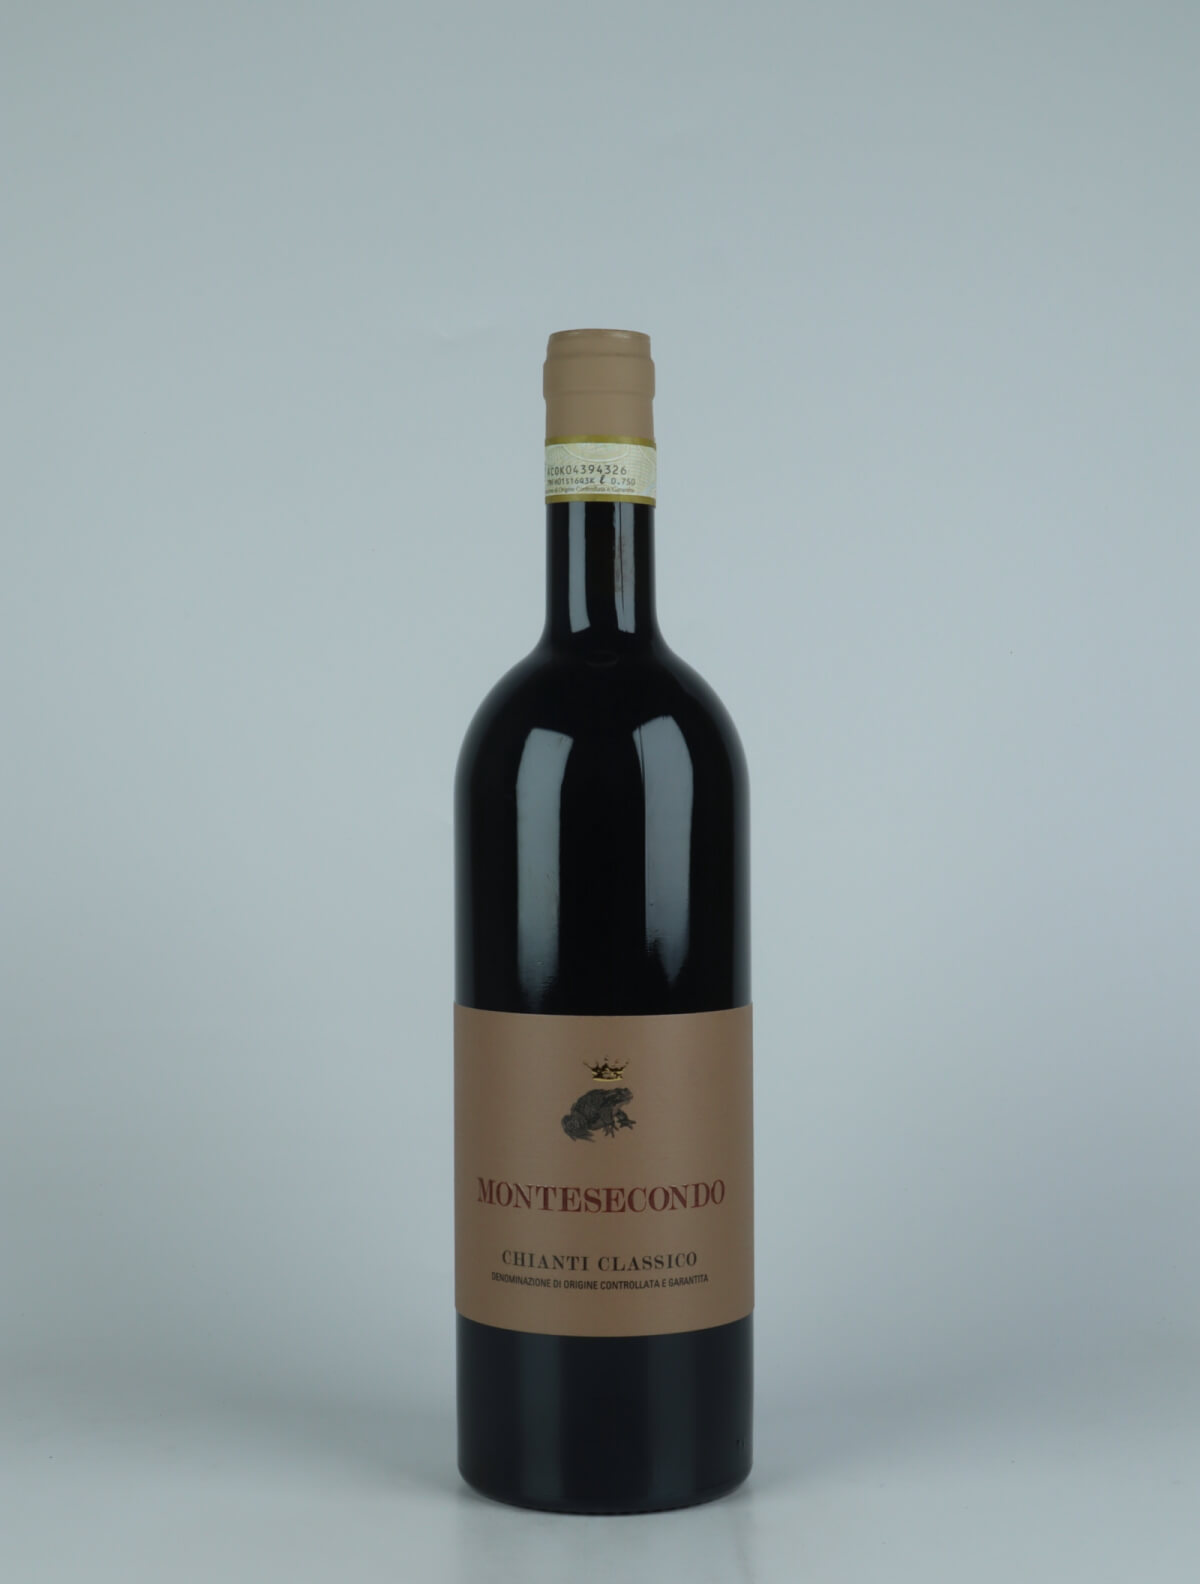 A bottle 2021 Chianti Classico Red wine from Montesecondo, Tuscany in Italy